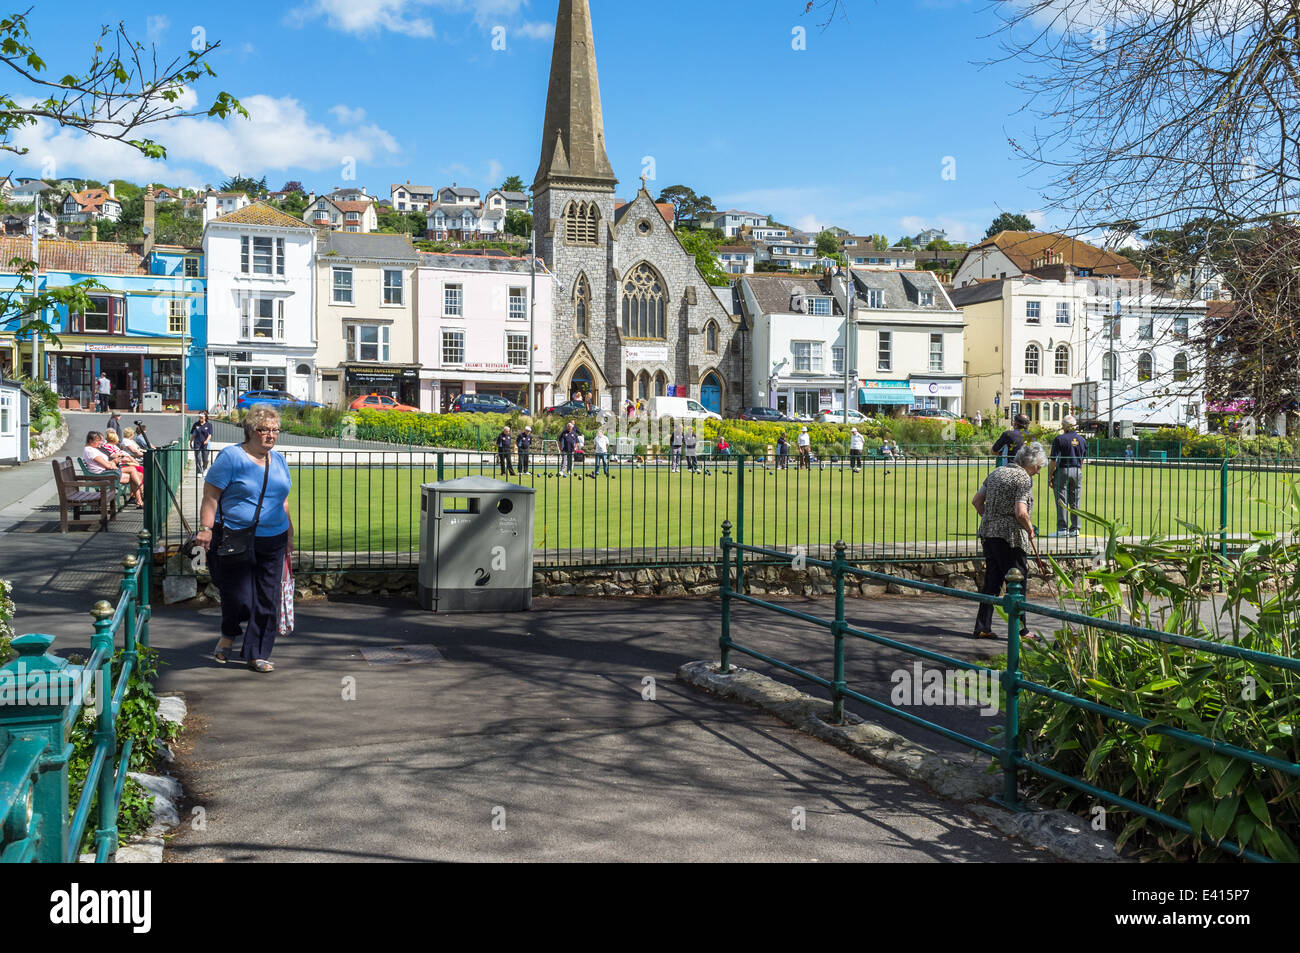 Dawlish, Devon, England.  People playing bowls at the Dawlish Bowls Club in the town centre, center. Stock Photo